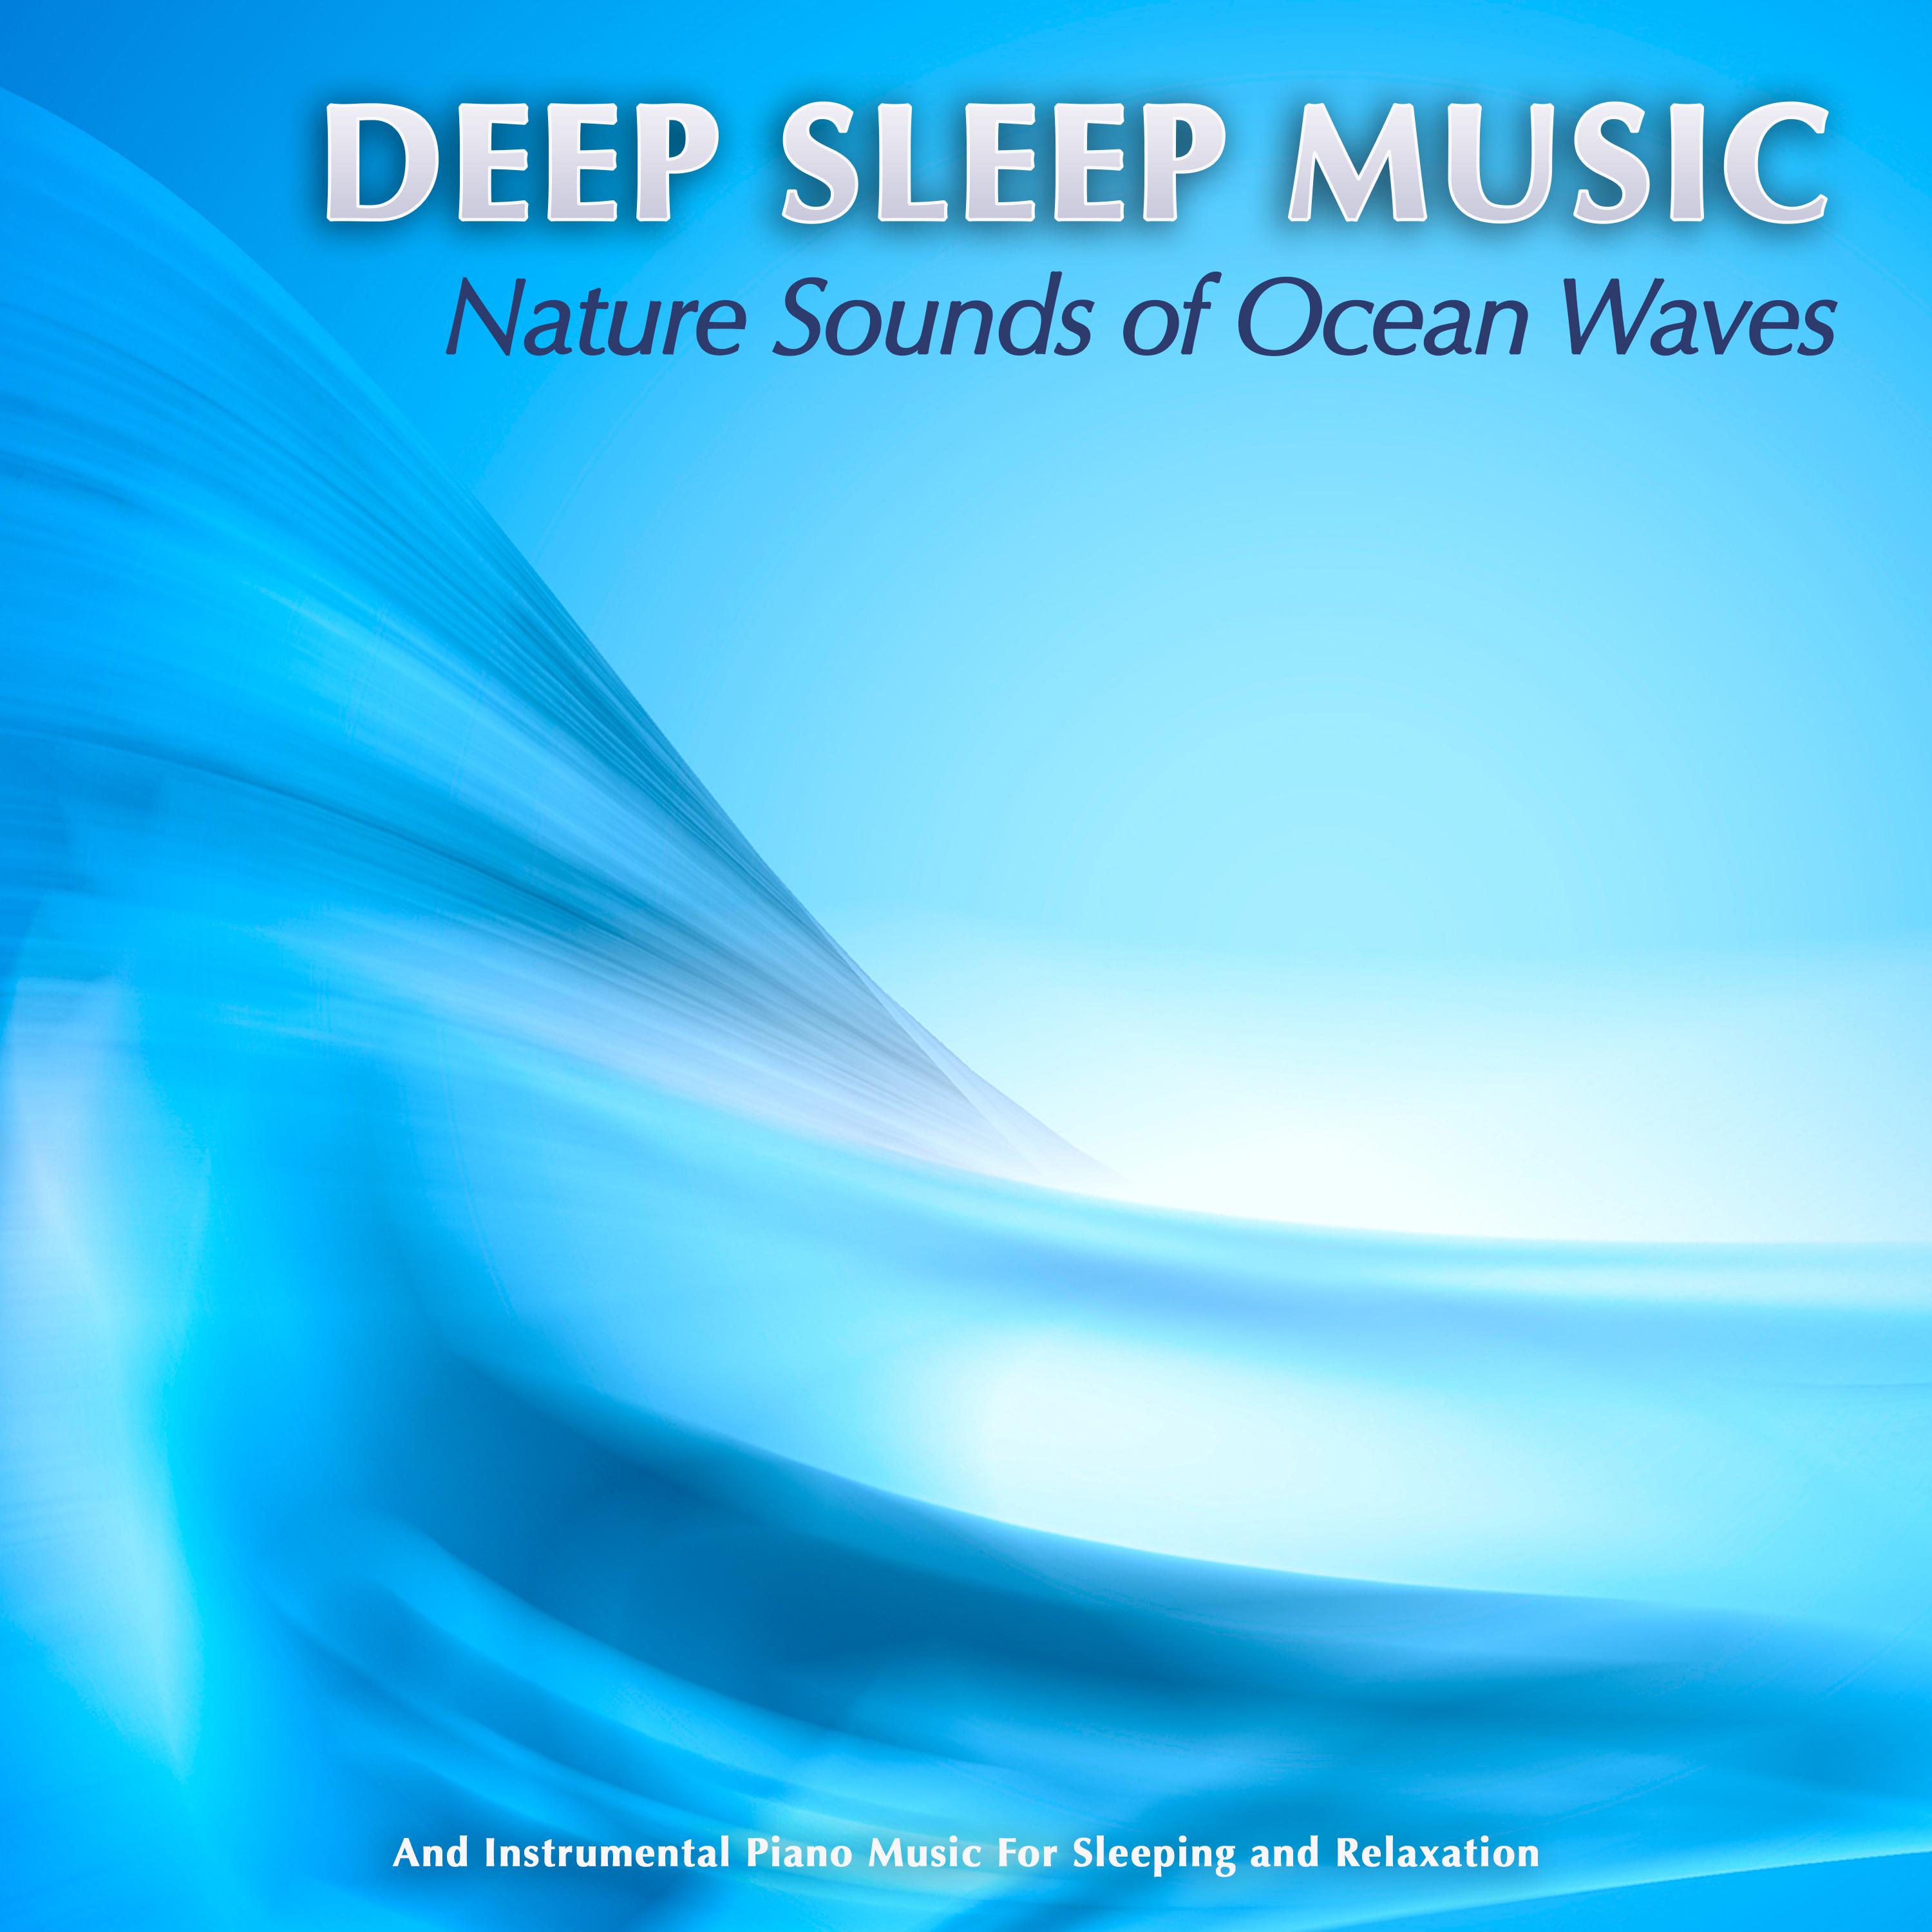 Deep Sleep Music: Nature Sounds of Ocean Waves and Instrumental Piano Music For Sleeping and Relaxation